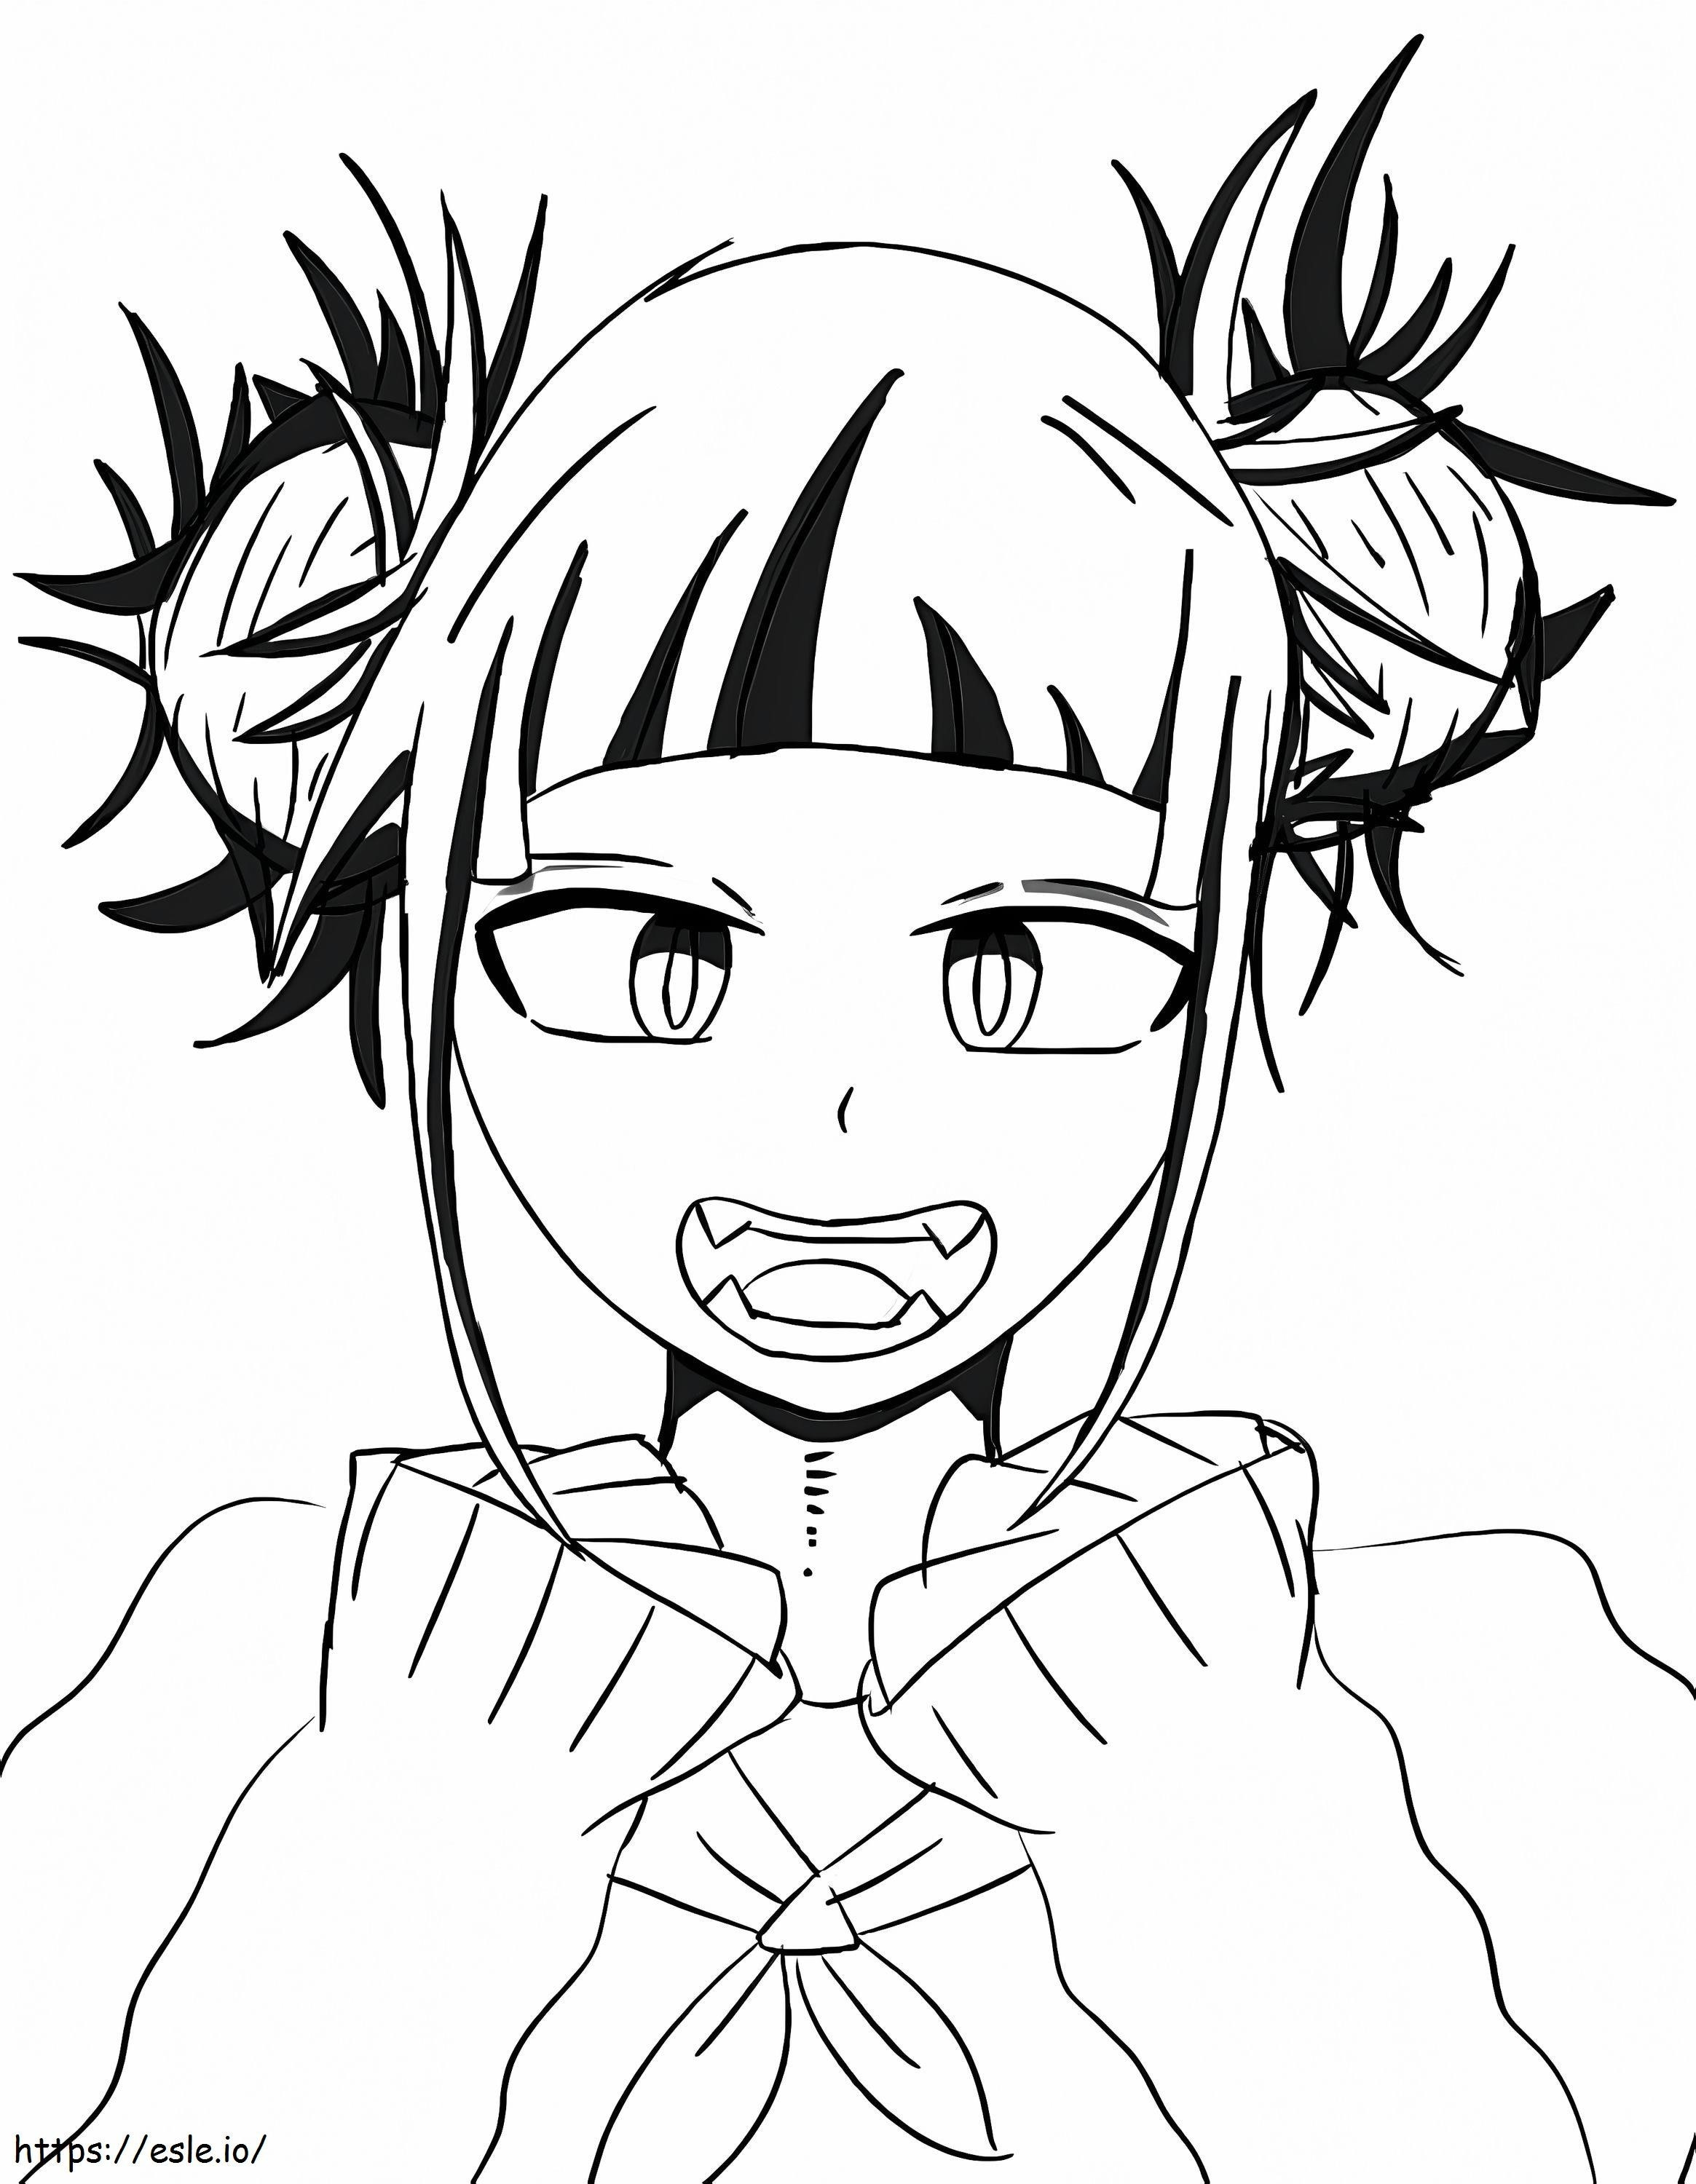 Toga Himiko 4 coloring page